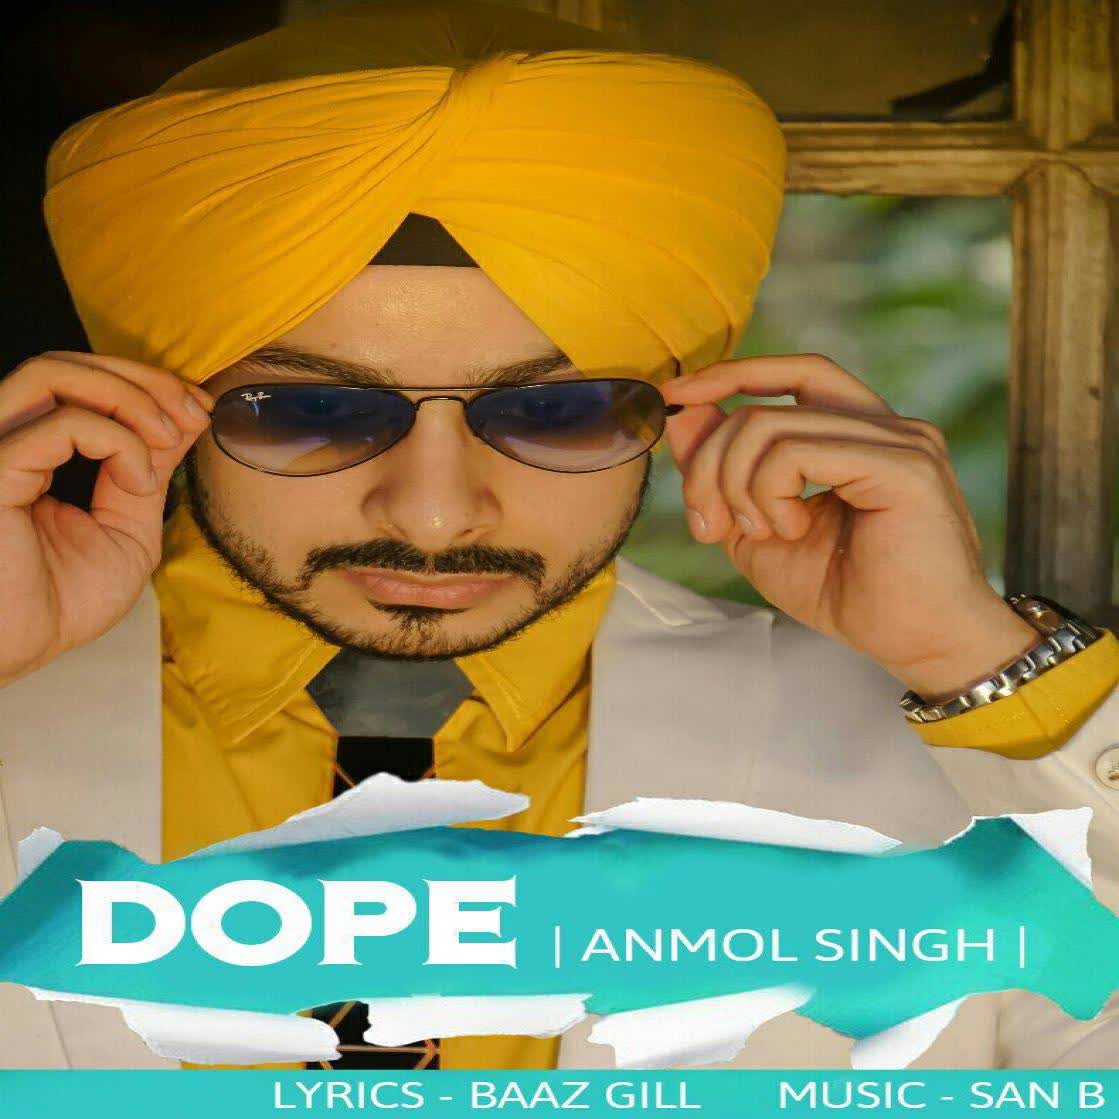 Dope Anmol Singh  Mp3 song download